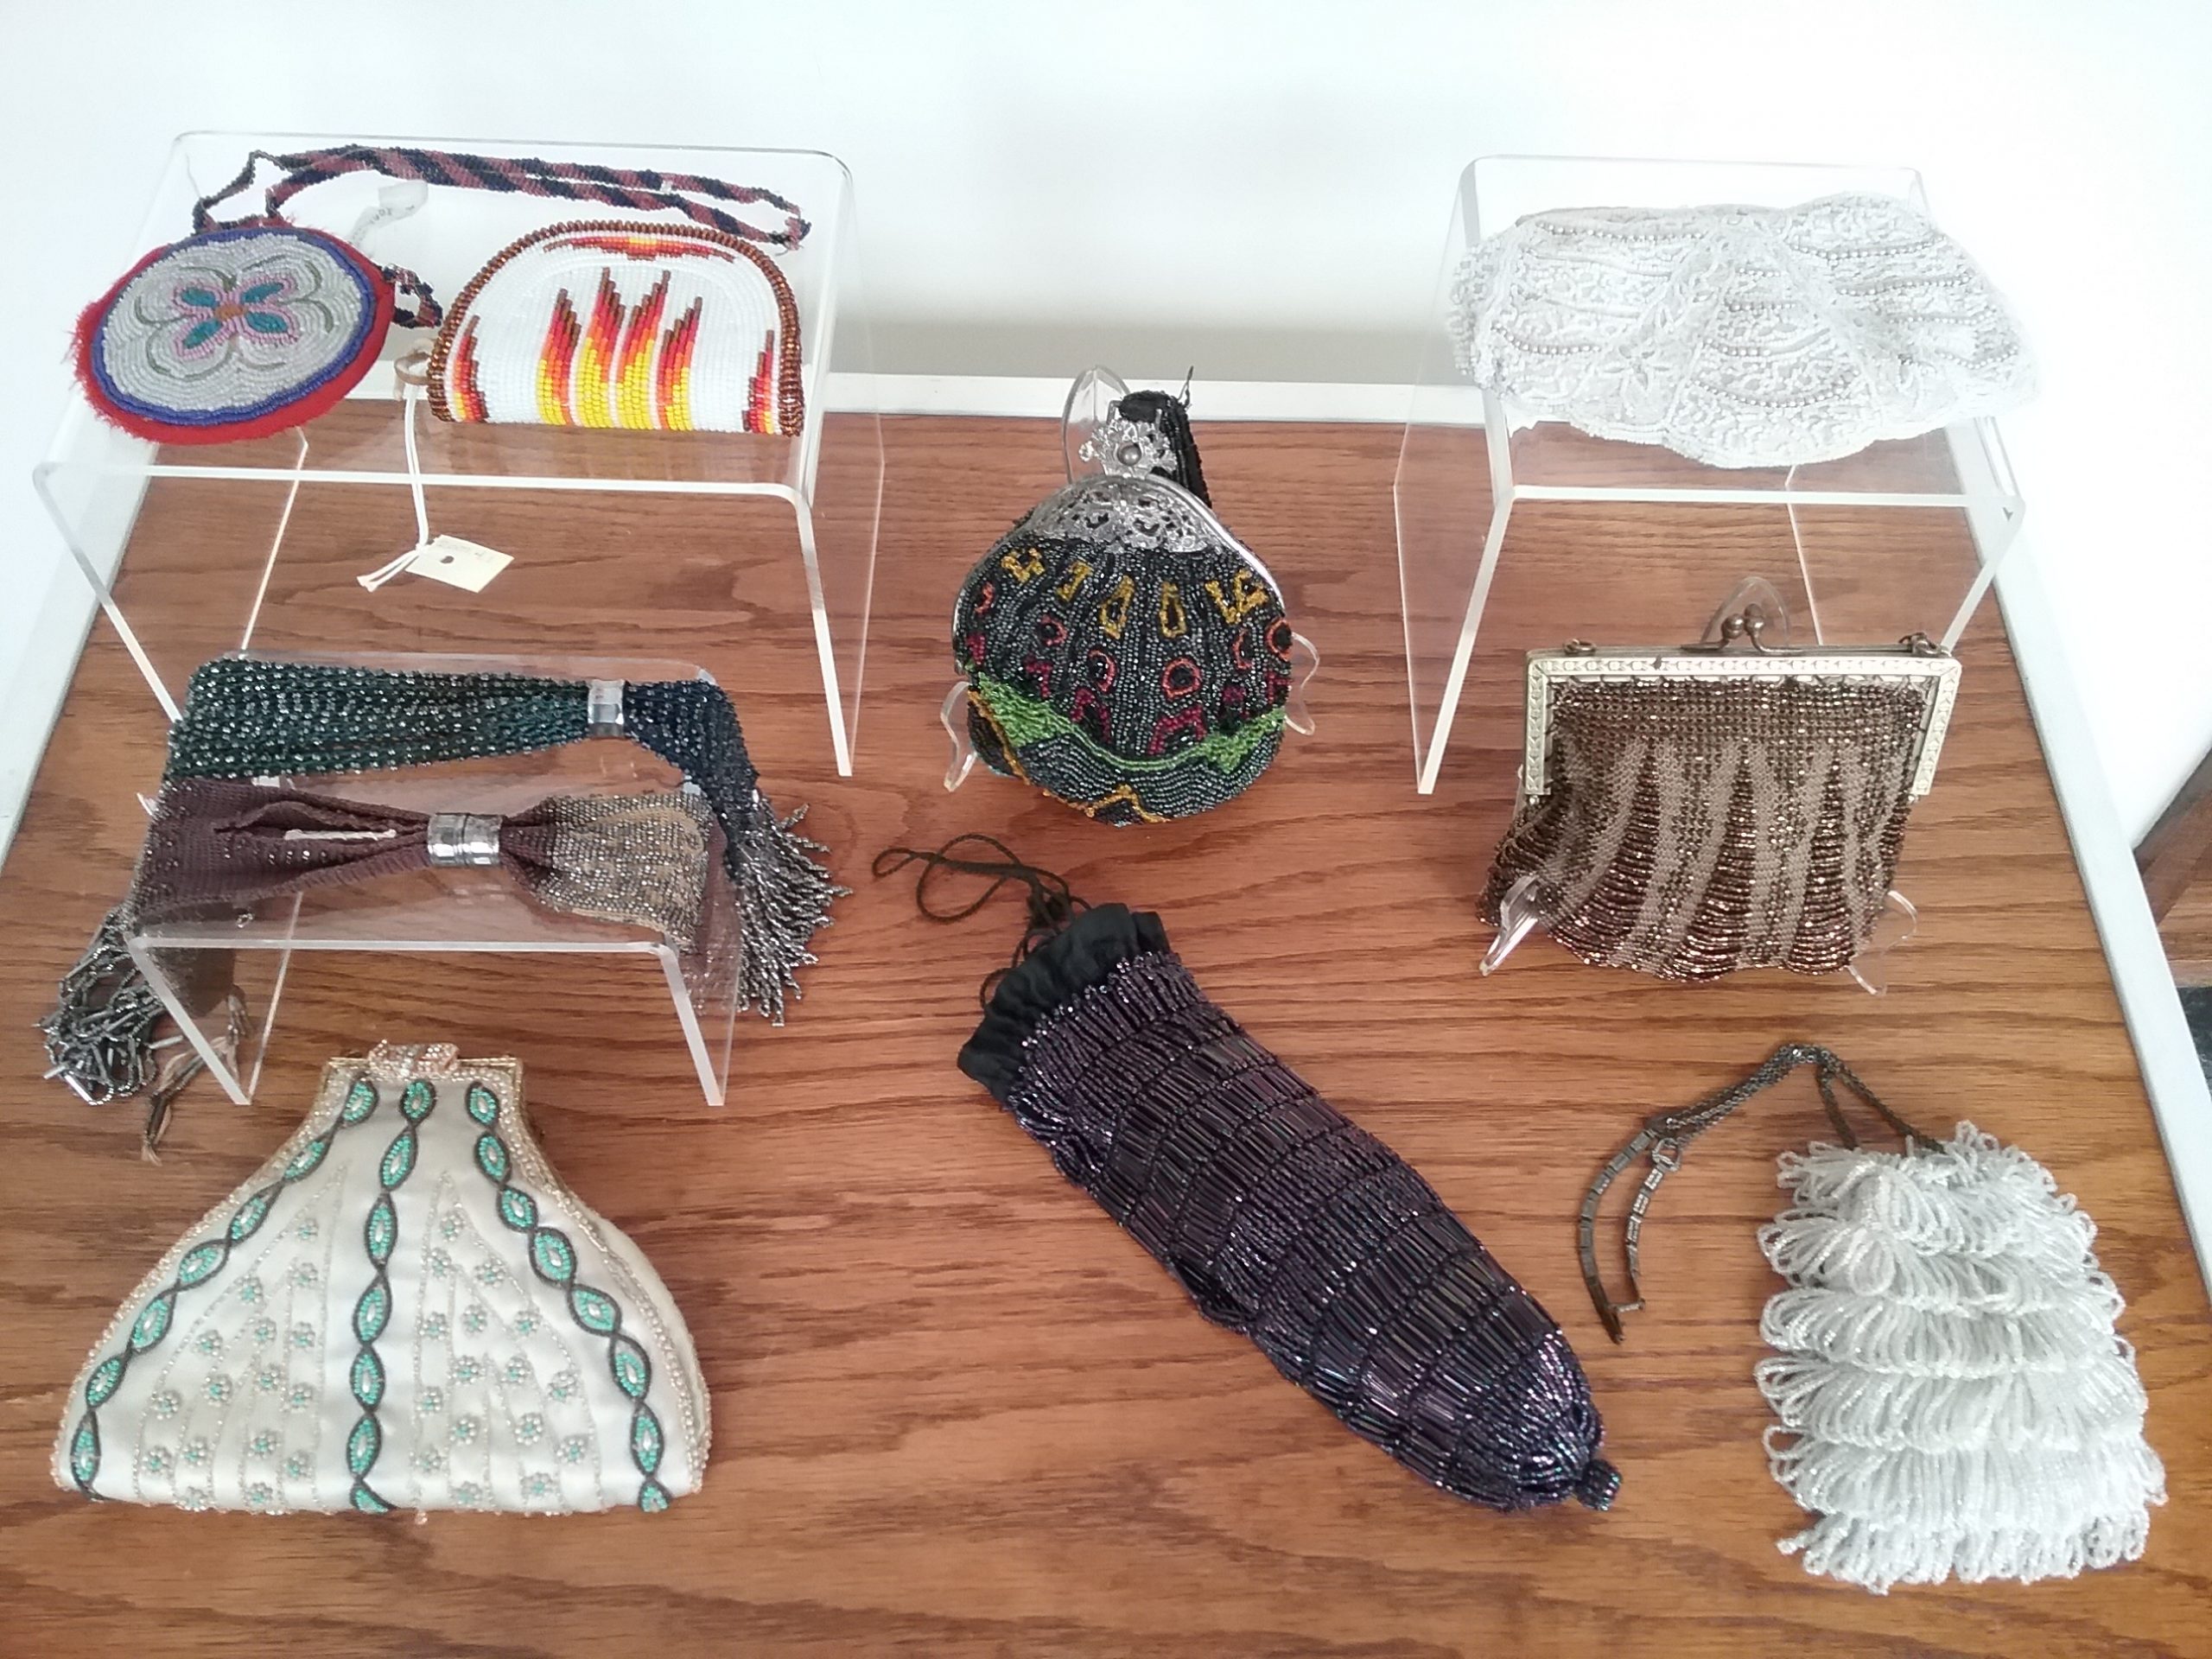 Case of beaded purses for BEAD Exhibit at The Charles A. Weyerhaeuser Memorial Museum, Little Falls, MN, 2020.